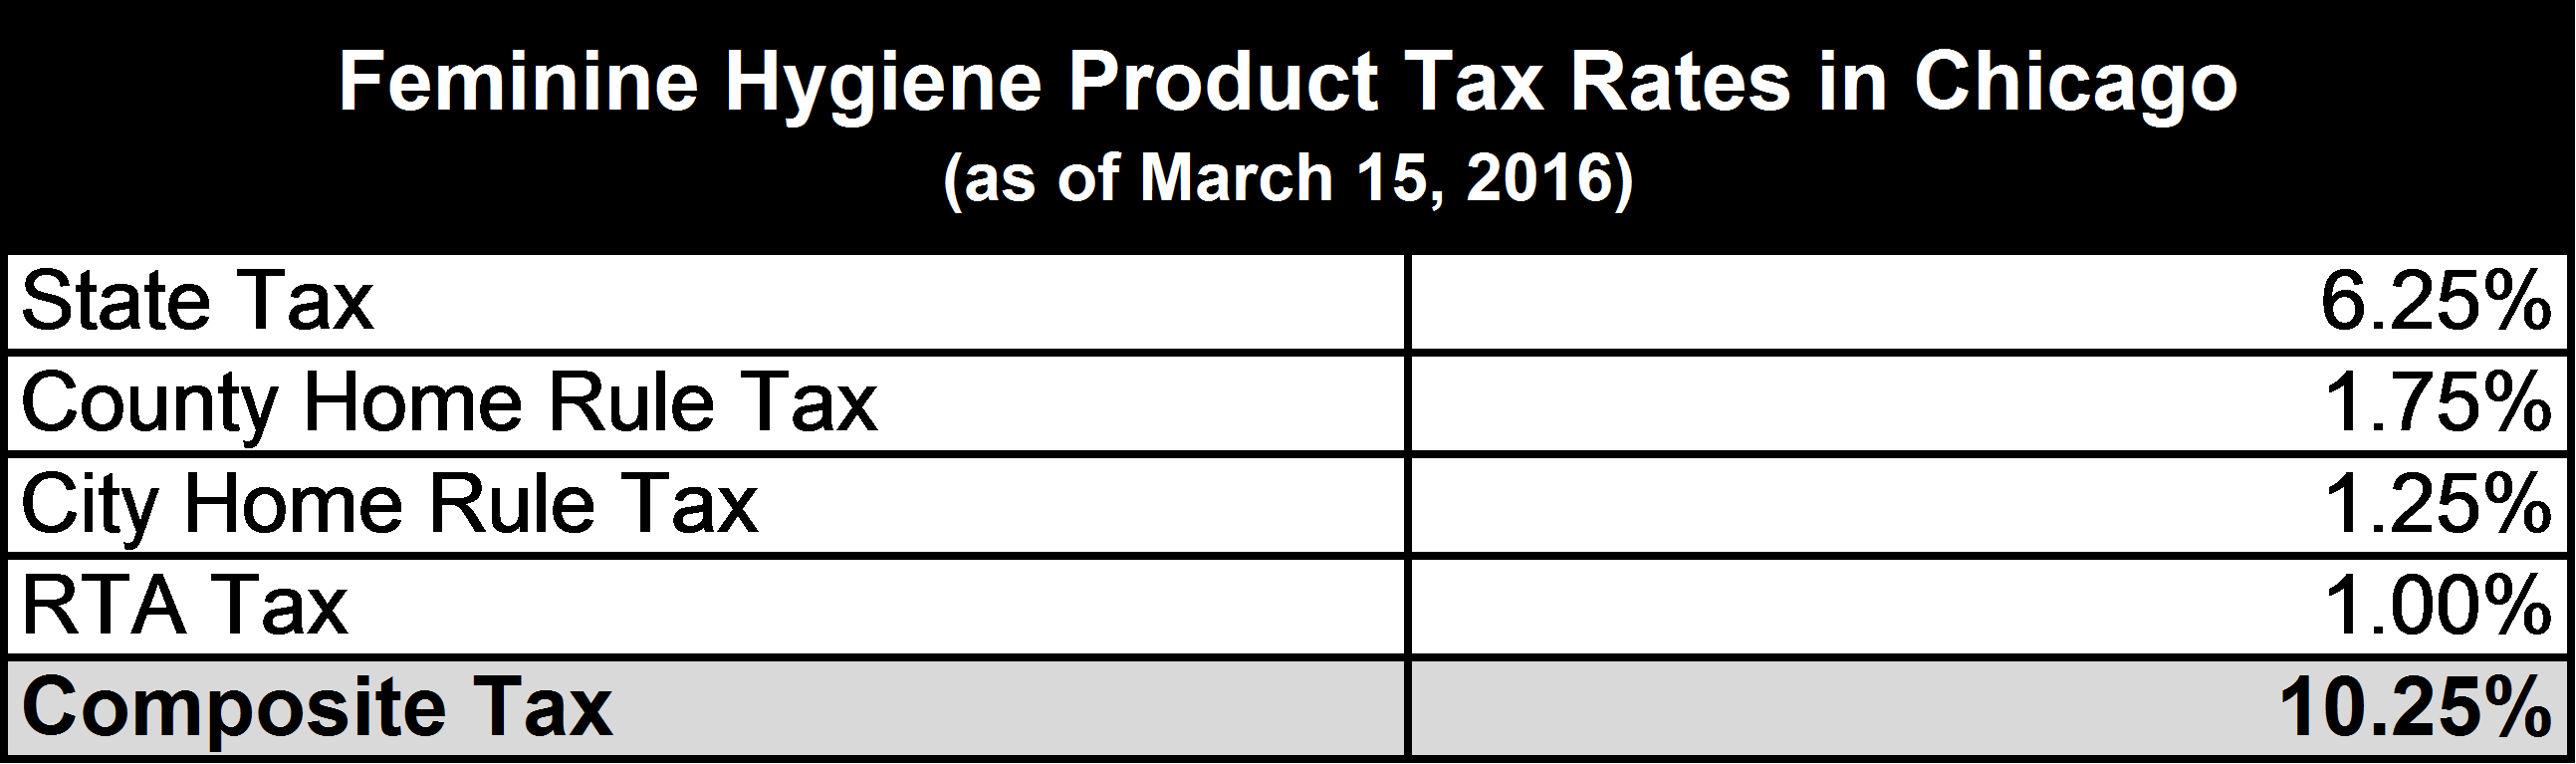 chicago-feminine-hygiene-products-tax-rate.png